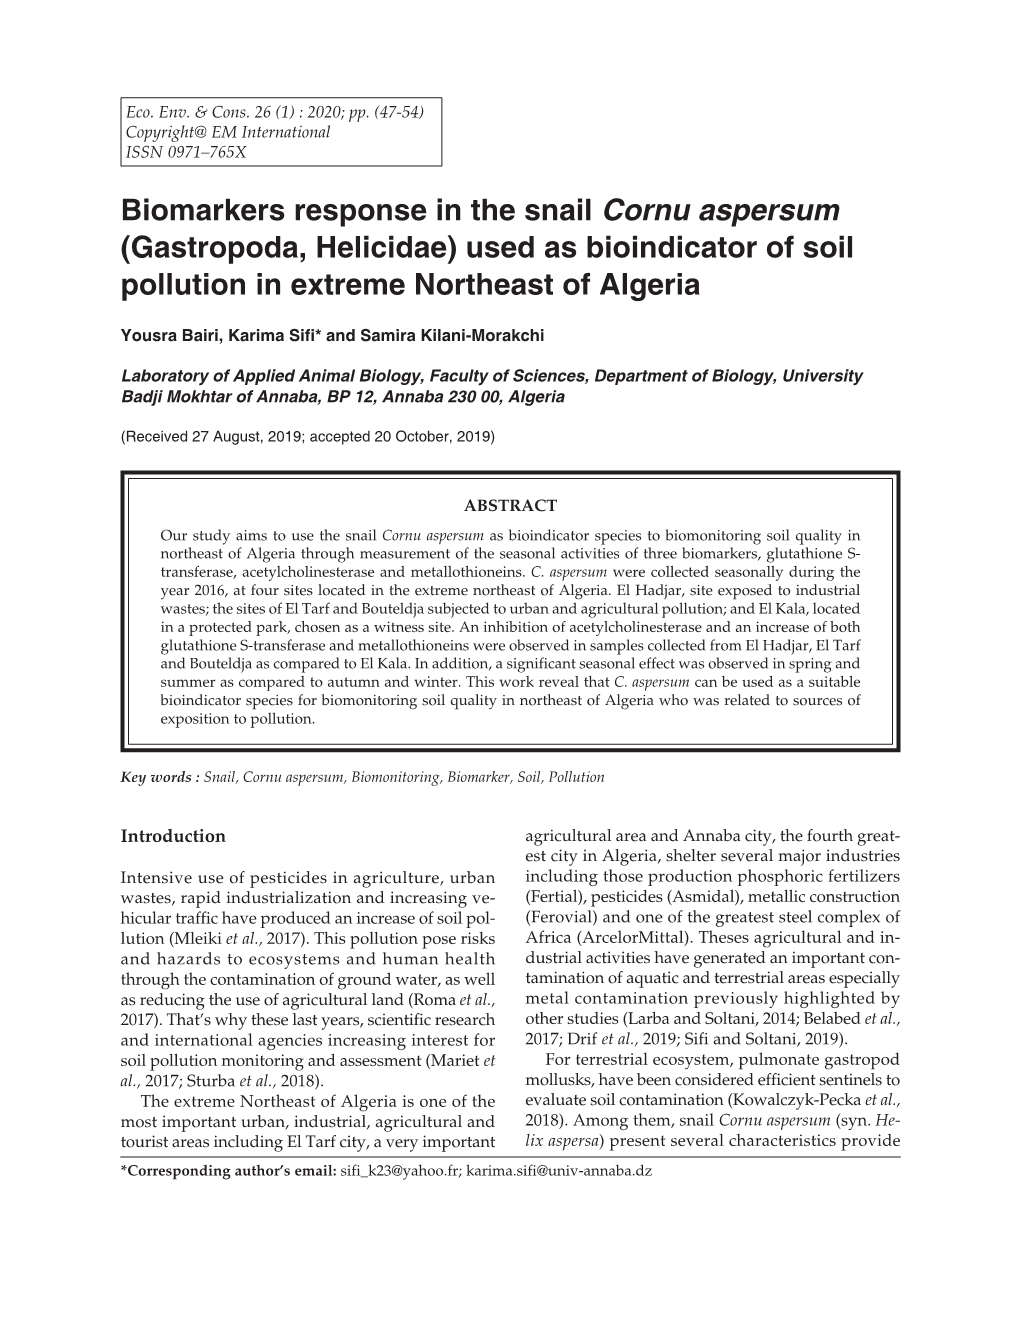 Biomarkers Response in the Snail Cornu Aspersum (Gastropoda, Helicidae) Used As Bioindicator of Soil Pollution in Extreme Northeast of Algeria